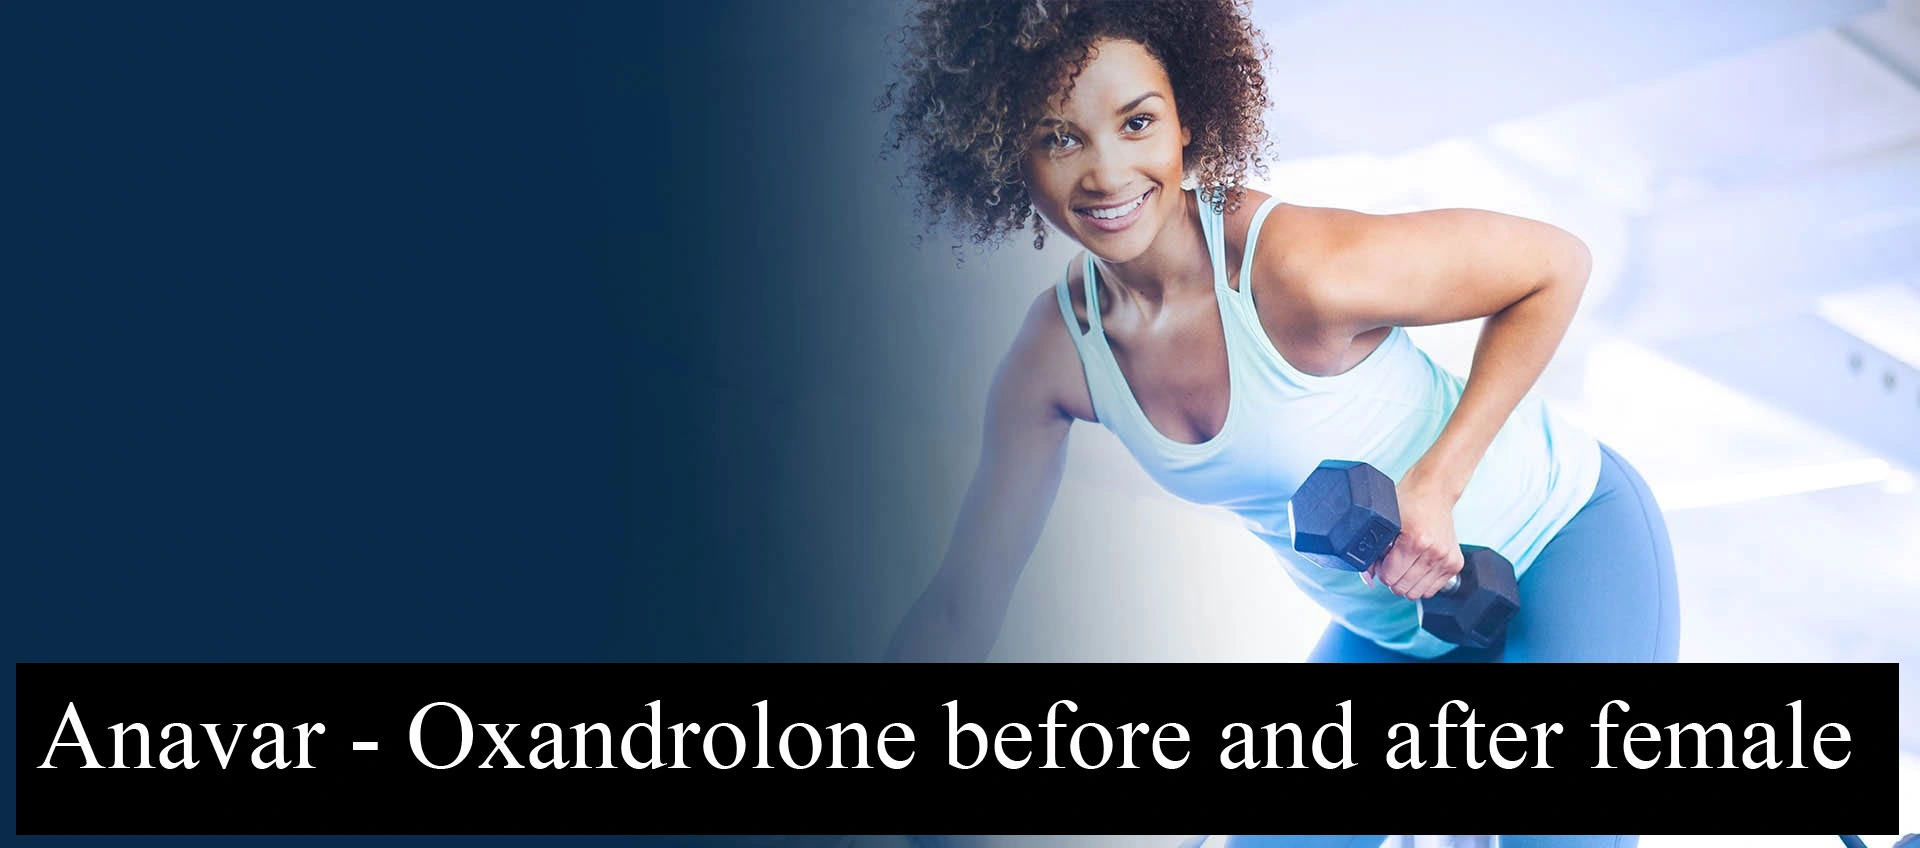 Oxandrolone before and after female